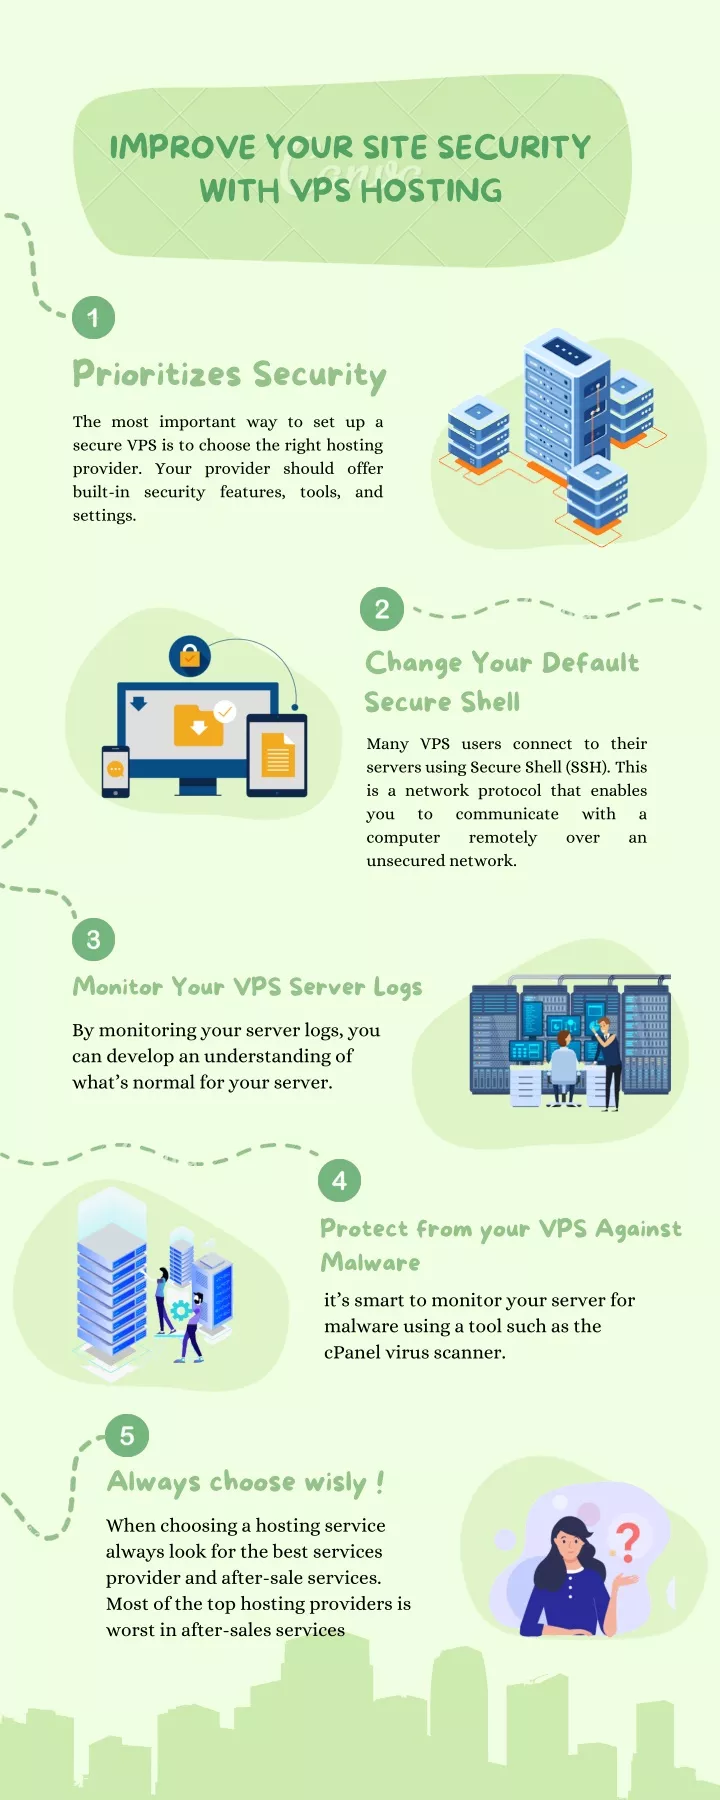 improve your site security with vps hosting